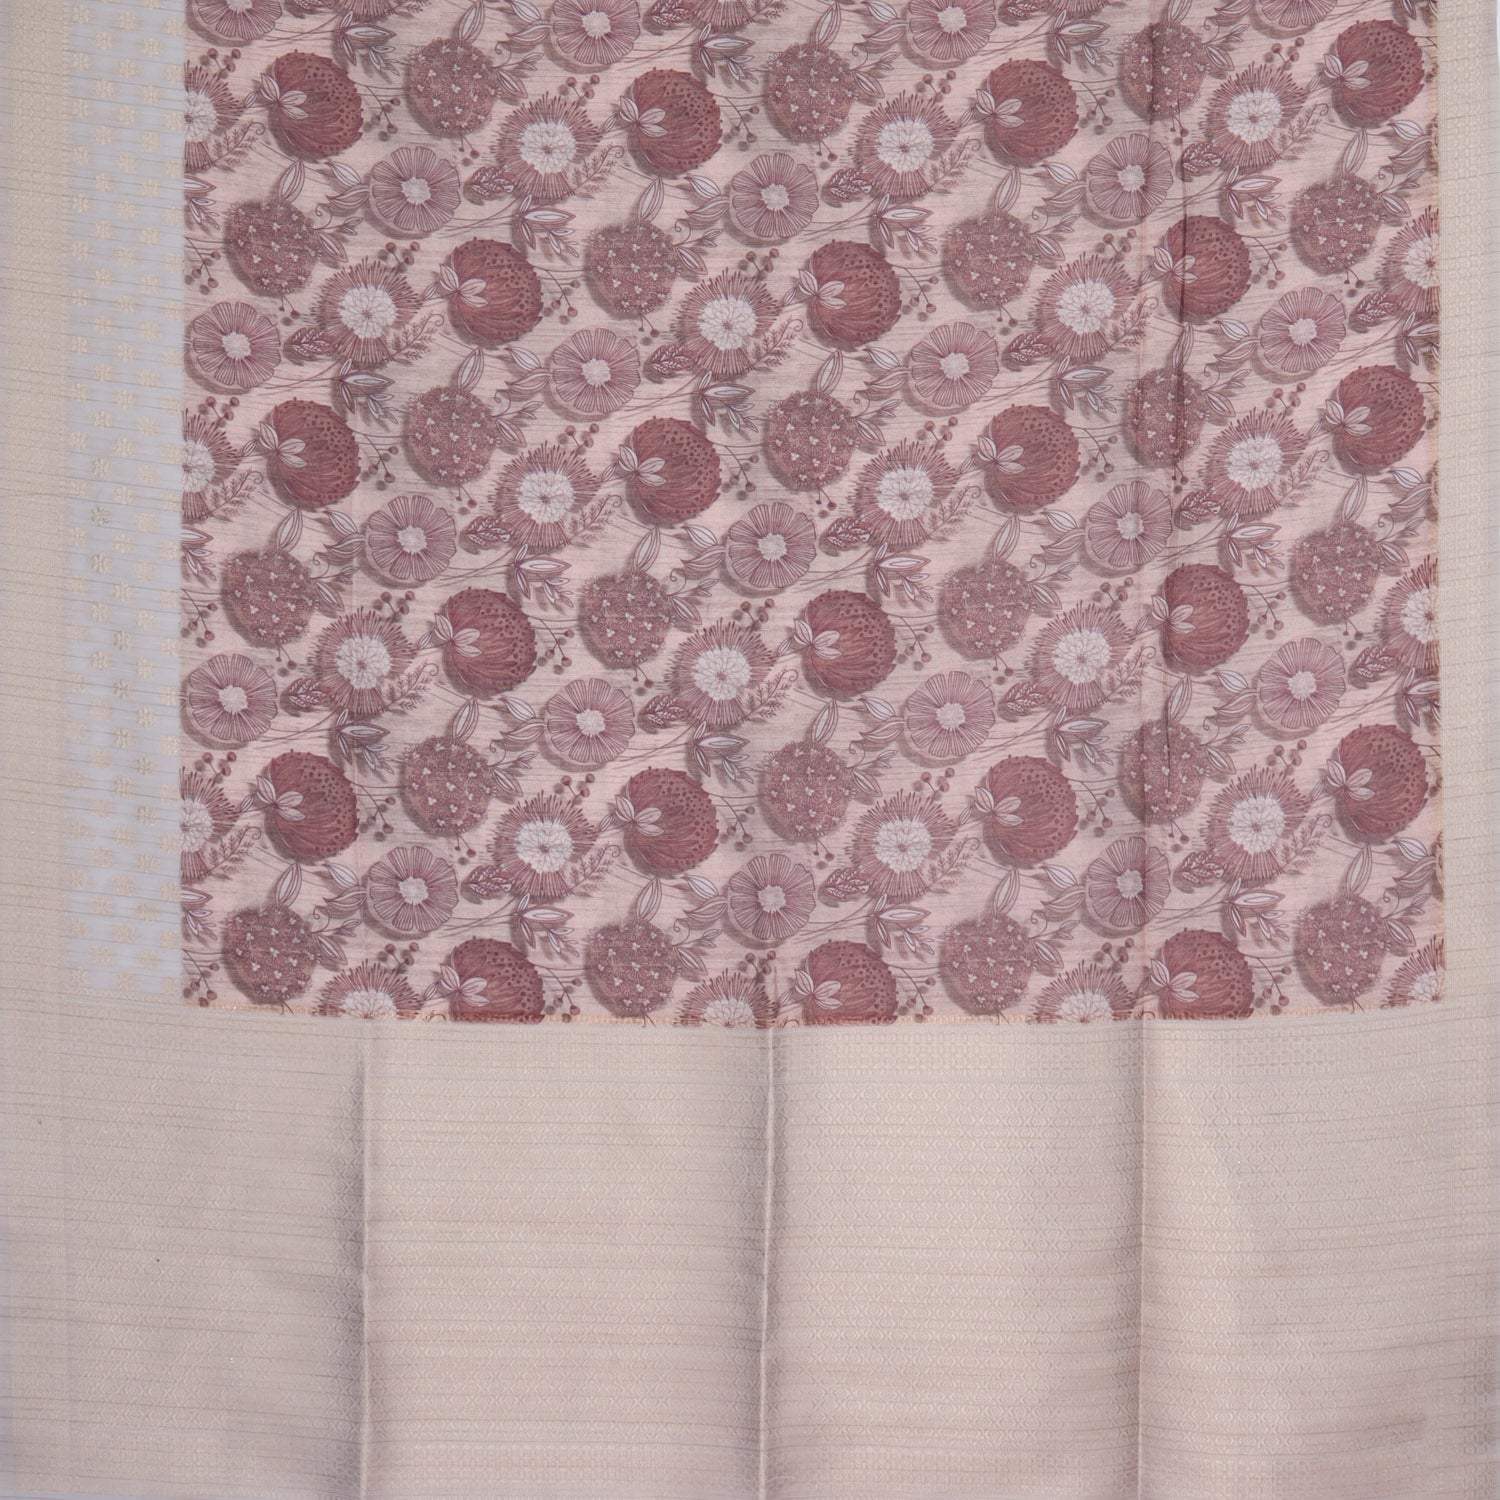 Beige Cotton Printed Saree With Floral Pattern - Singhania's